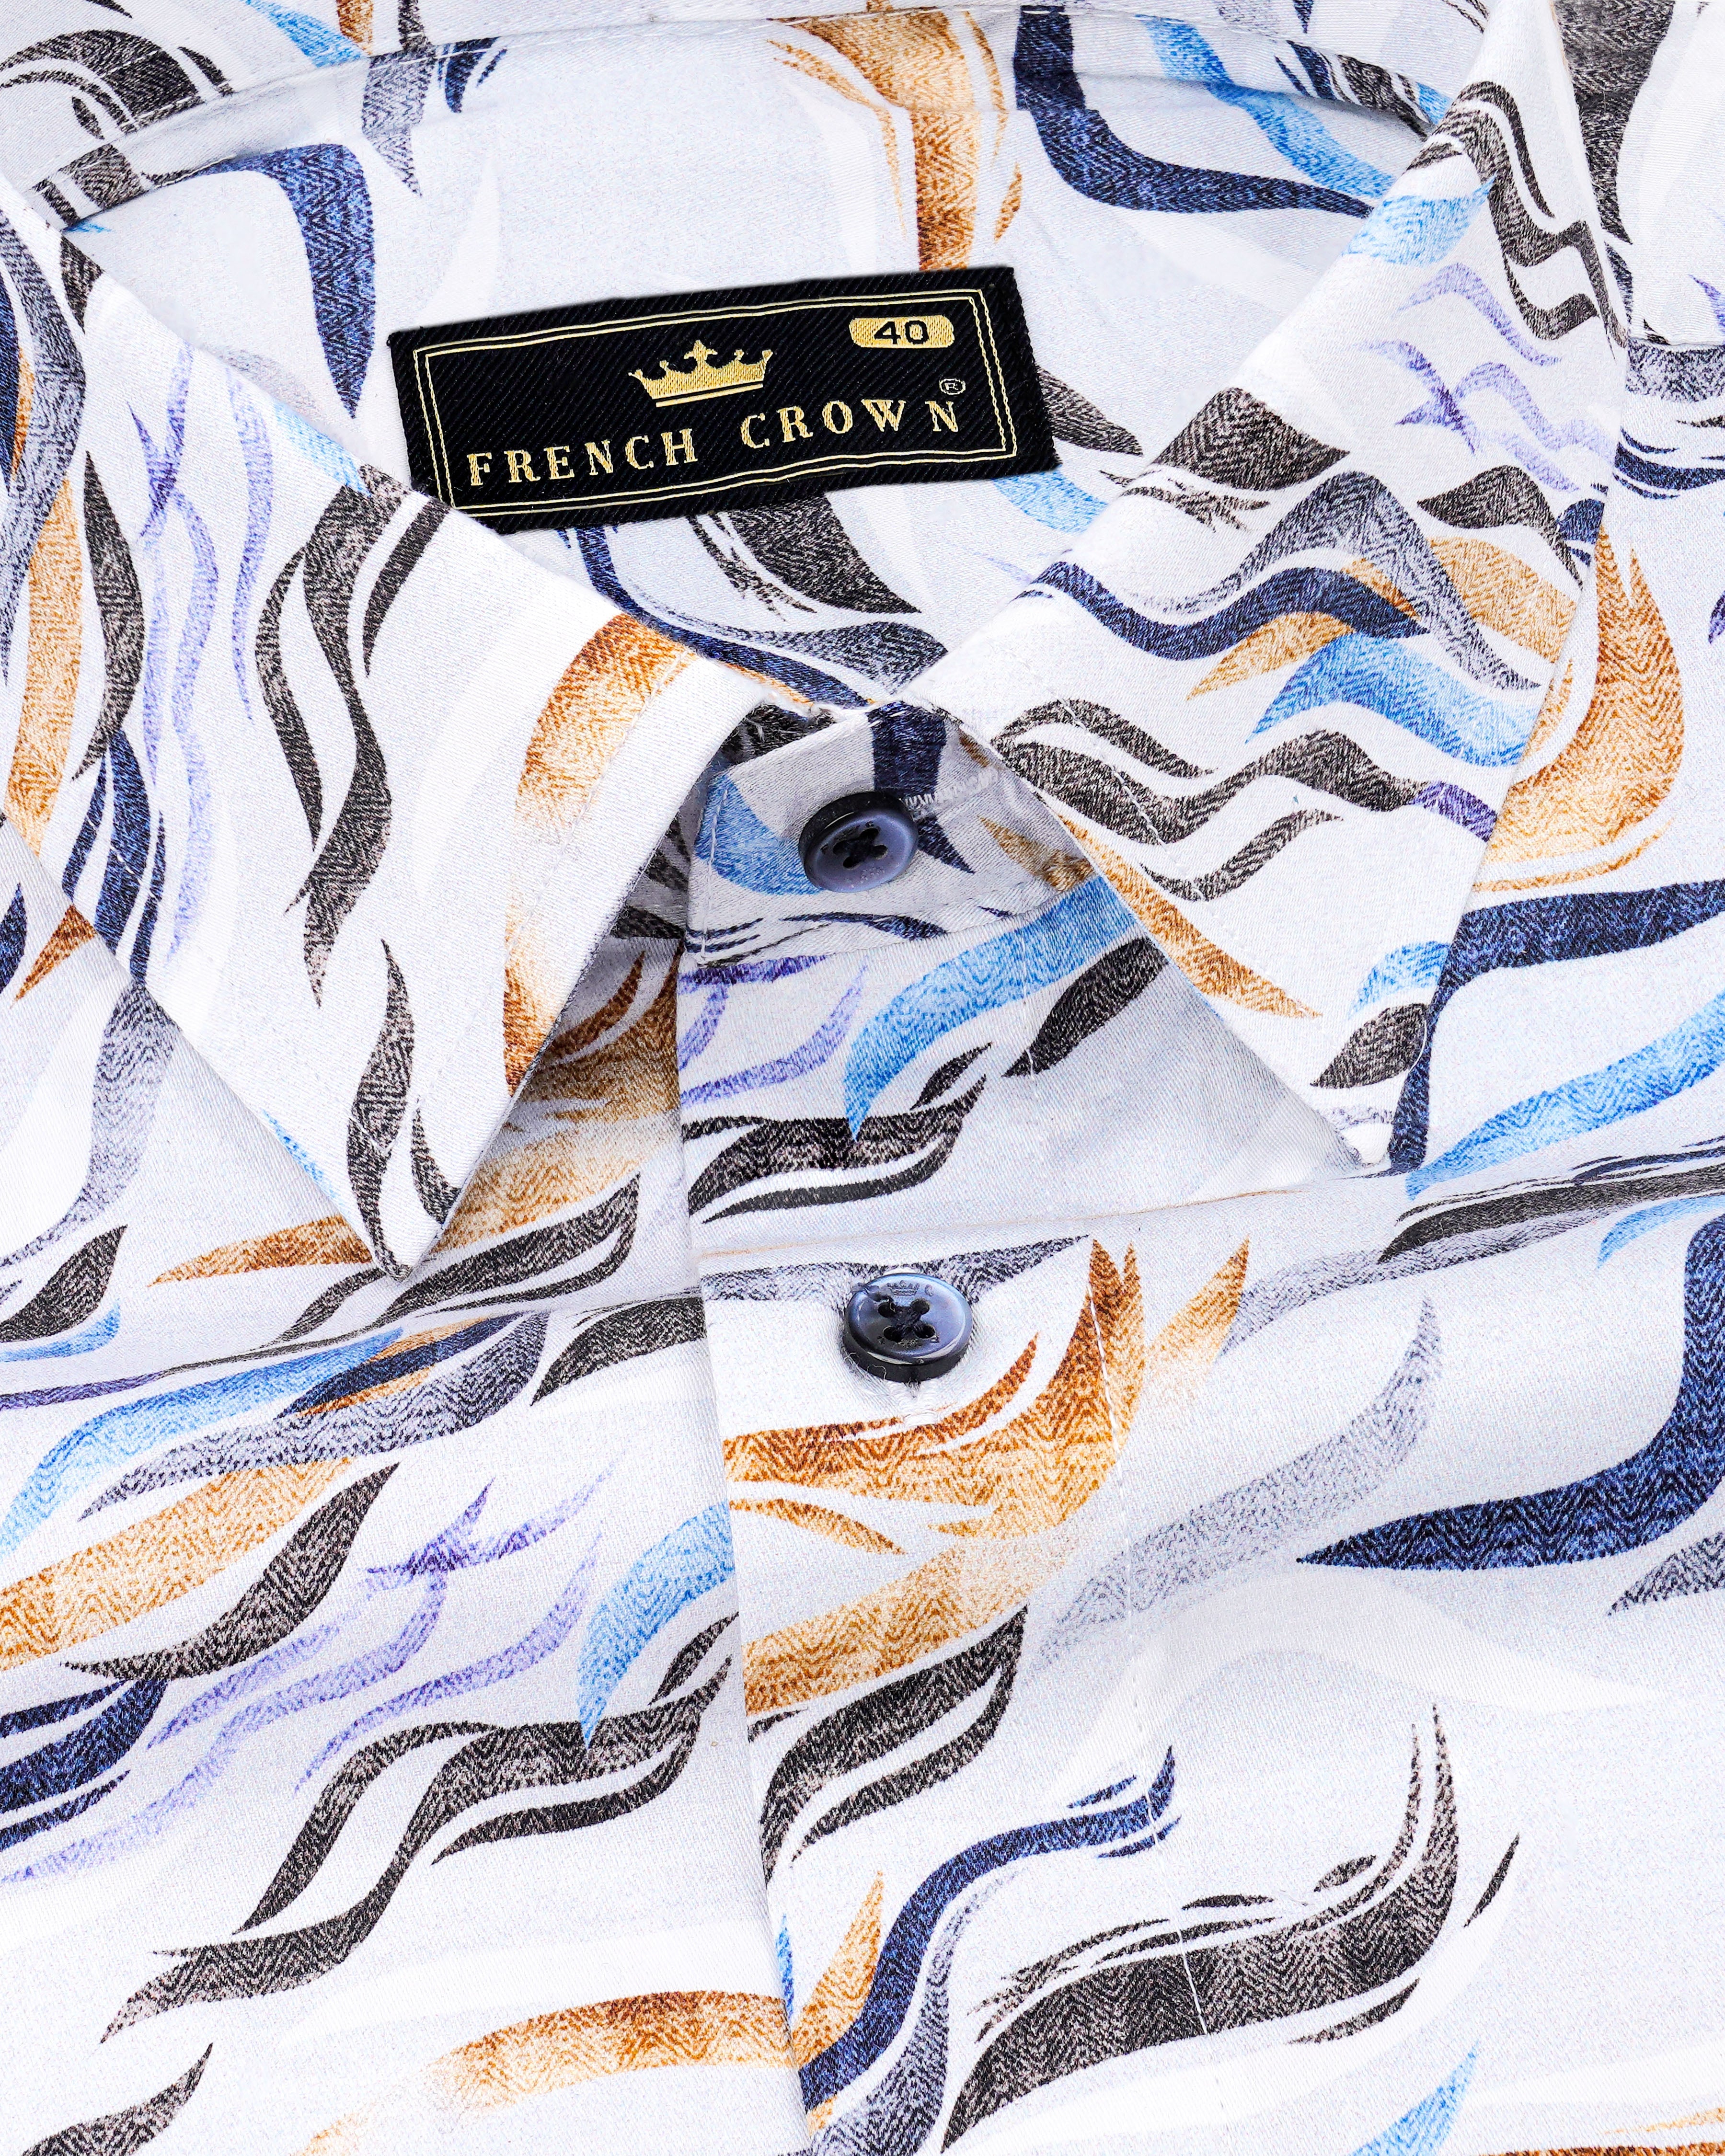 Bright White with Driftwood Brown and Minsk Blue Printed Super Soft Premium Cotton Shirt 8241-BLE-38,8241-BLE-H-38,8241-BLE-39,8241-BLE-H-39,8241-BLE-40,8241-BLE-H-40,8241-BLE-42,8241-BLE-H-42,8241-BLE-44,8241-BLE-H-44,8241-BLE-46,8241-BLE-H-46,8241-BLE-48,8241-BLE-H-48,8241-BLE-50,8241-BLE-H-50,8241-BLE-52,8241-BLE-H-52